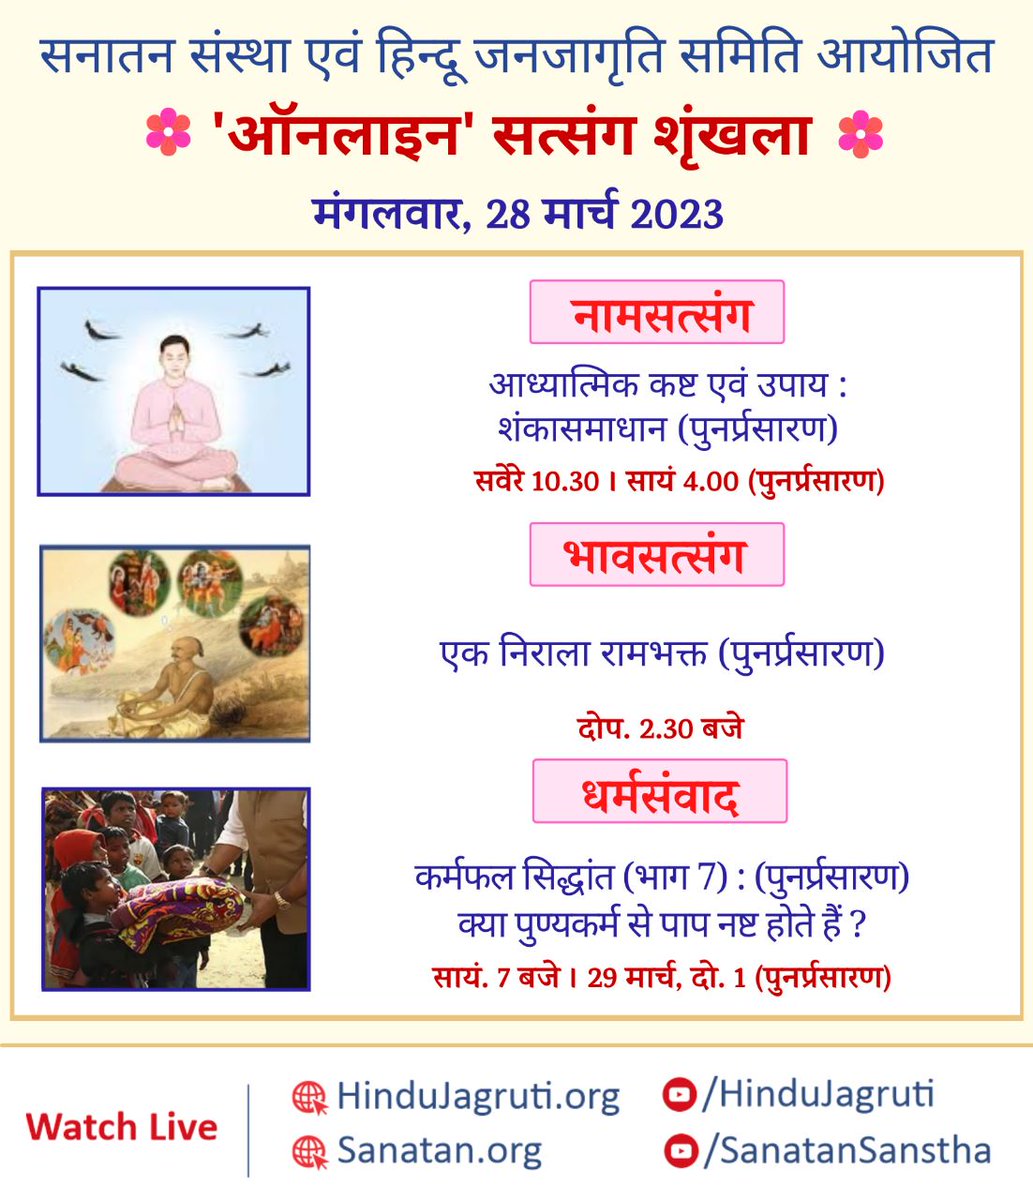 Watch today's online Satsang series based on spiritual background involving in everyone's daily activities, Come forward to attend, learn and do practice to enjoy the life blissfully.
Watch live@ : 
Youtube.com/SanatanSanstha
Youtube.com/HinduJagruti
#OnlineSatsang
#TuesdayMotivation